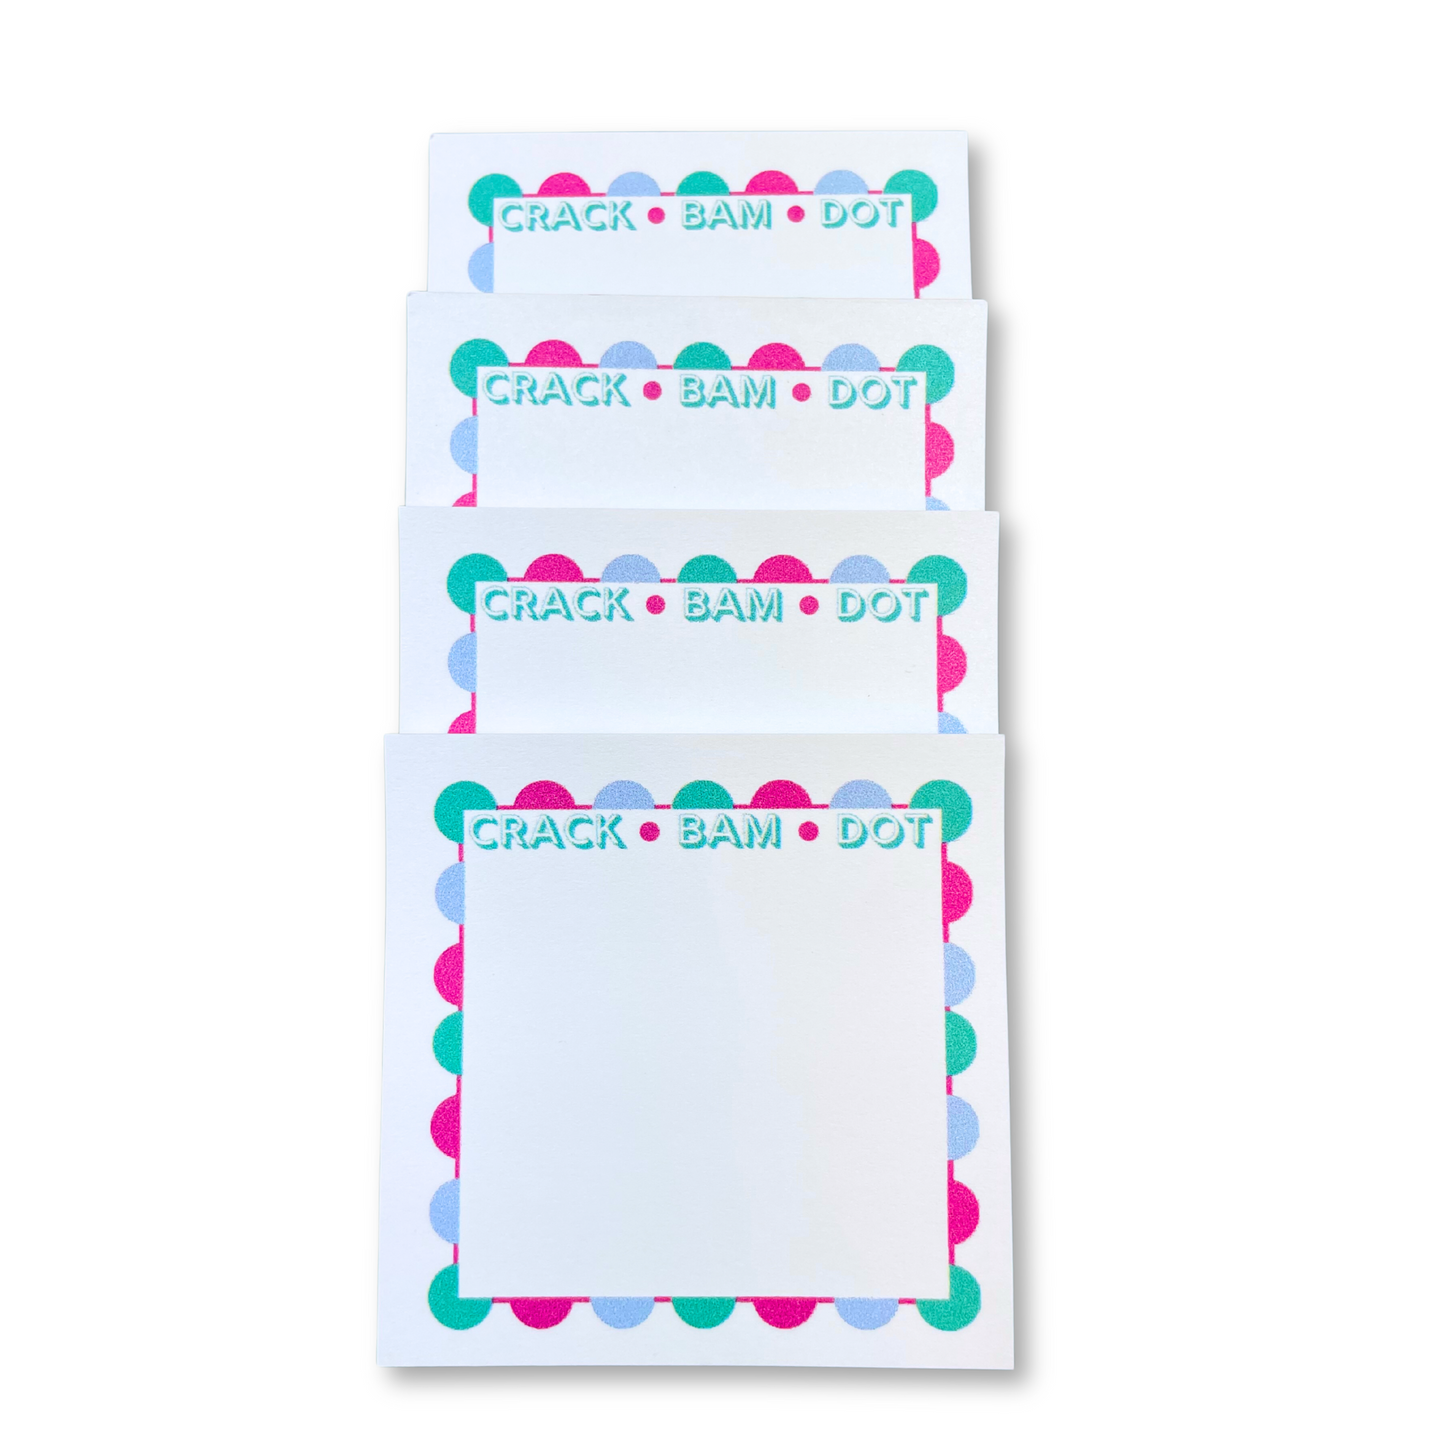 Mahjong Post It Sticky Note Pad pack of 4- Mahjongg notes with Crack Bam Dot in Pink Green and Blue Colorful Design and Border